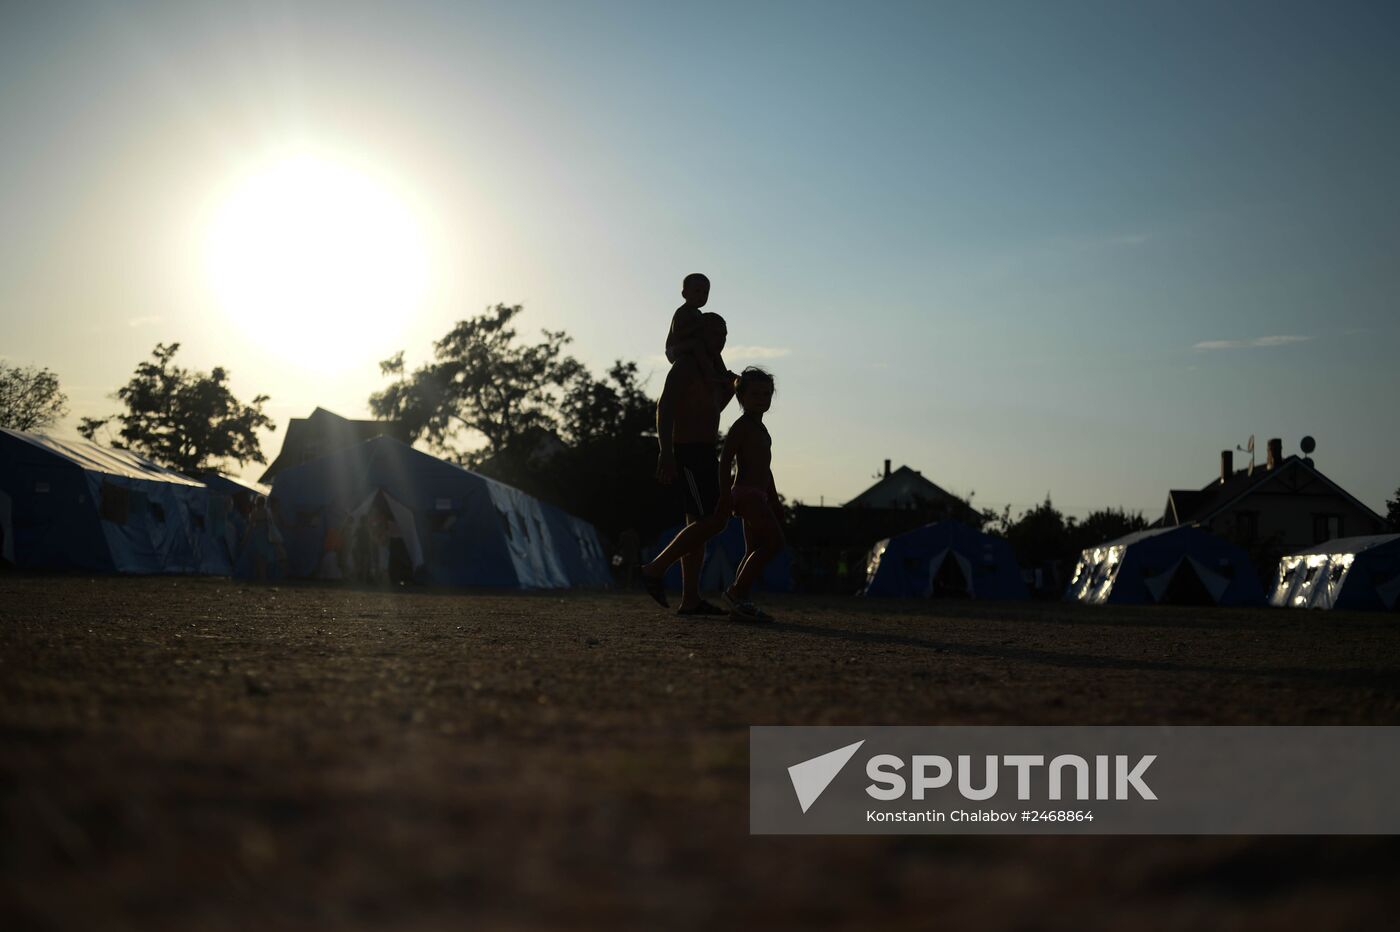 Camp with refugees from eastern Ukraine in Sevastopol